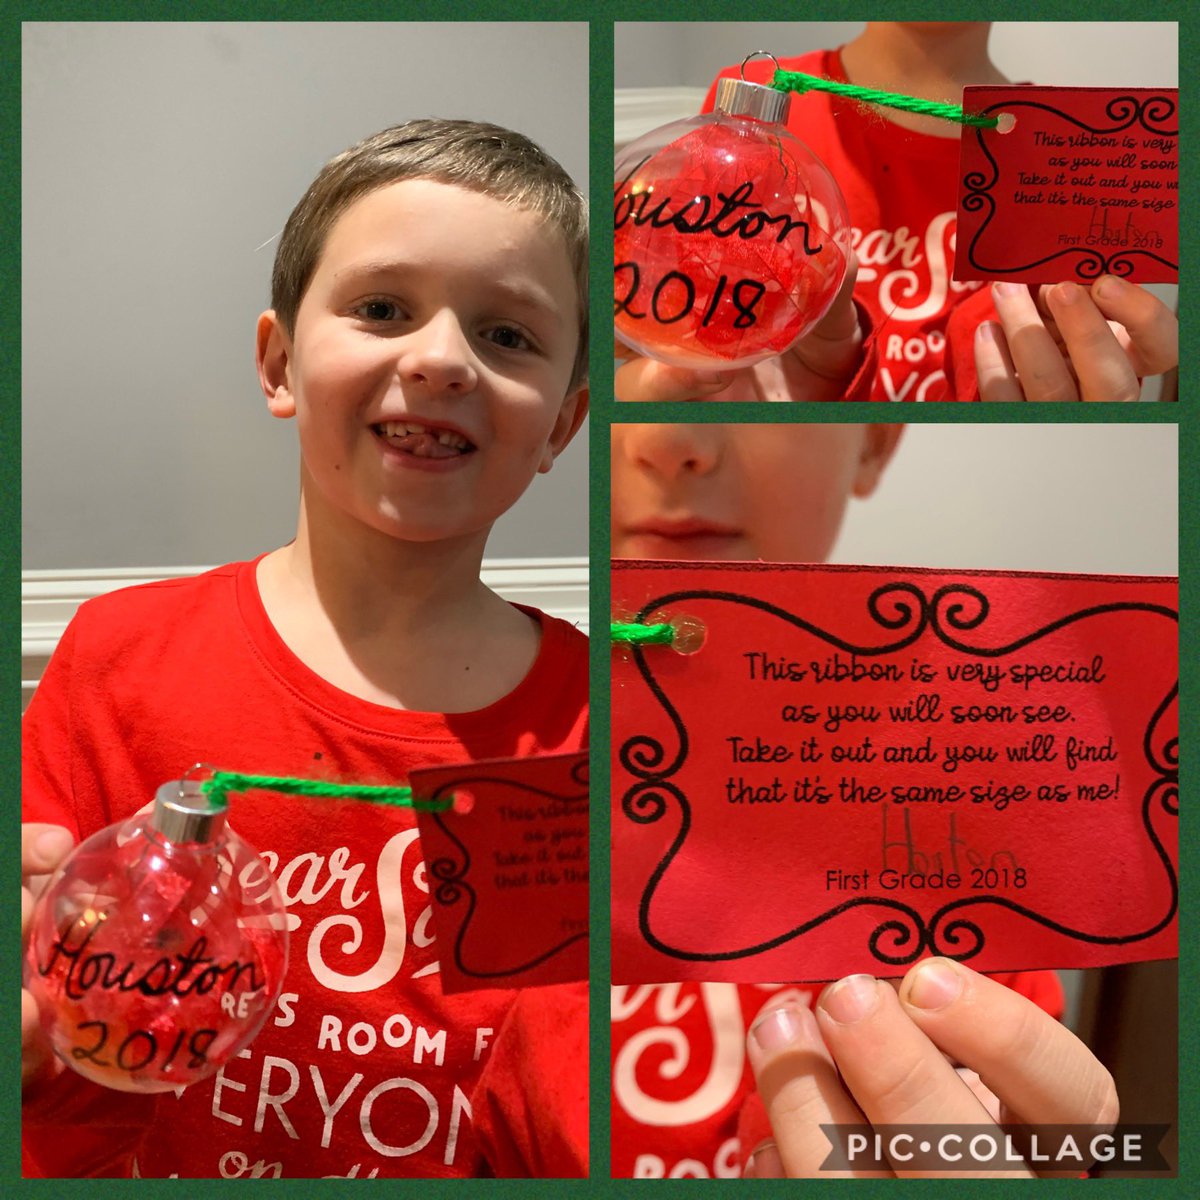 Houston just gave me the best gift ever!  The ornament that has ribbon as tall as him in it. Thank you @MrsSimorelli I will treasure this always. @SalemElementary #HoustonGoesToFirstGrade #Ornaments #HandmadeGiftsAreTheBest #TimeSlowDown